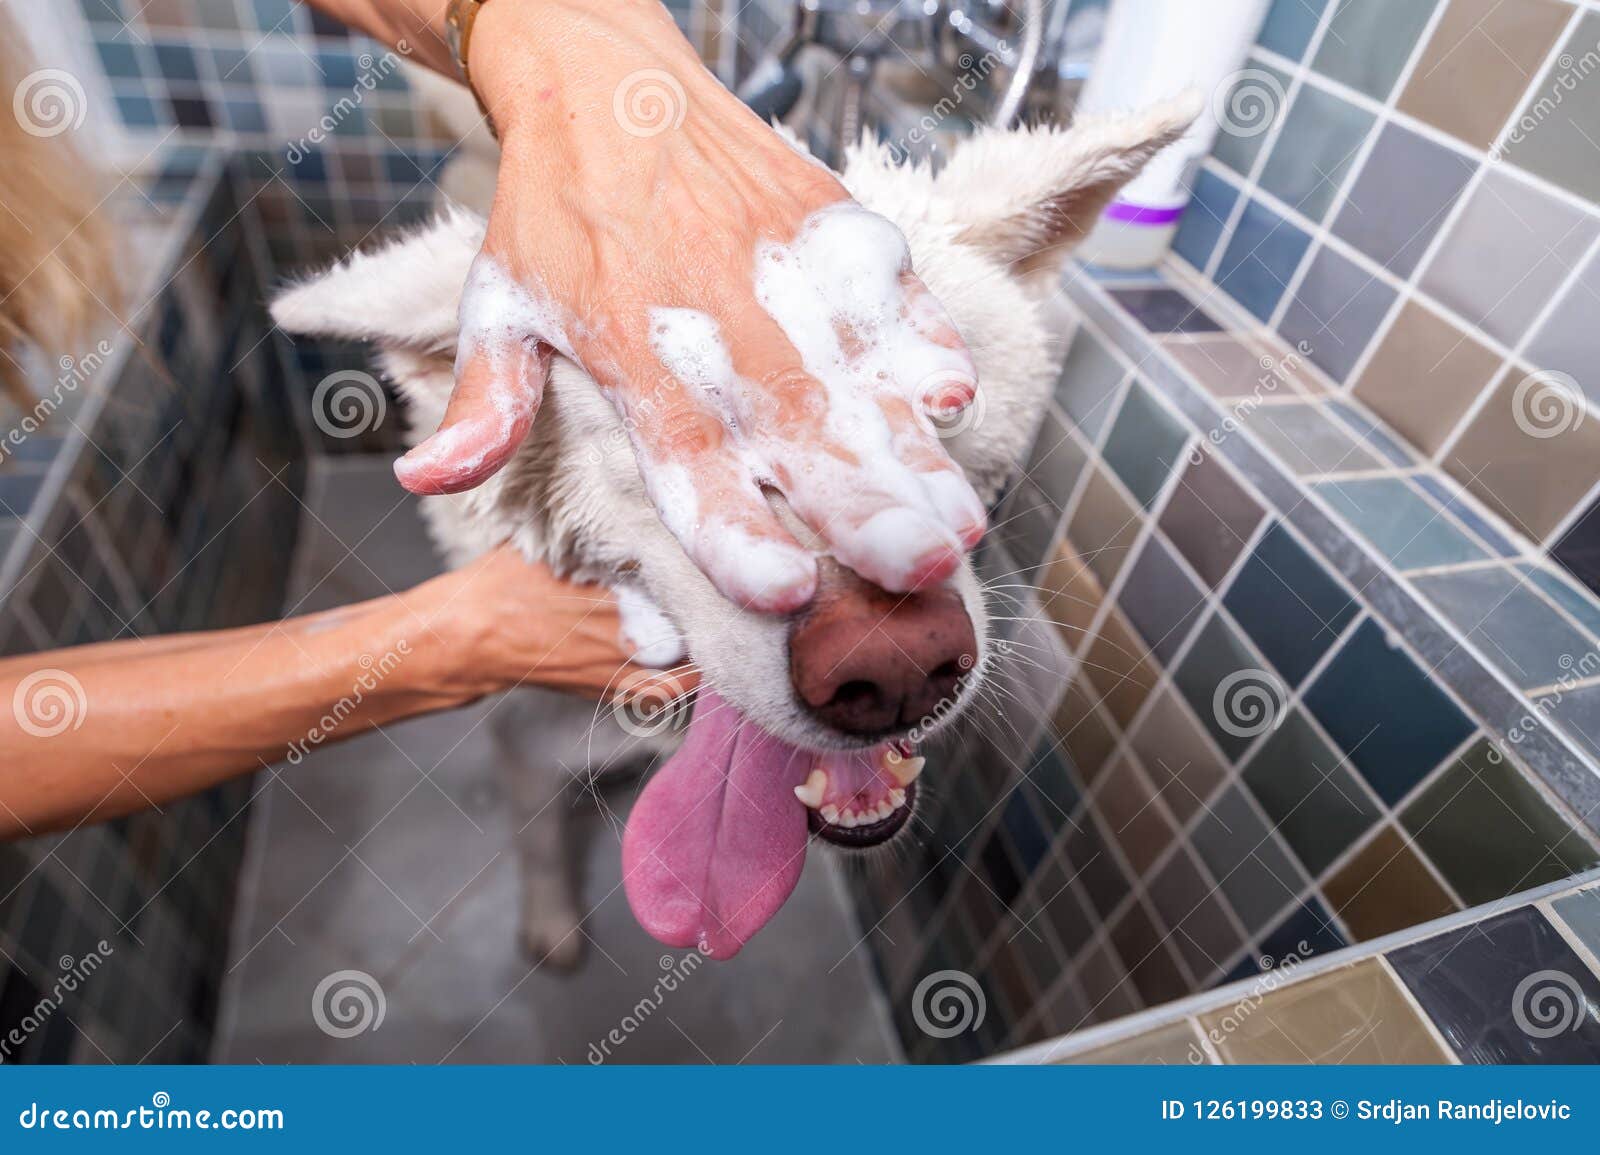 big white and wet akita inu dog bathing in the bathtub with funny face expression, selective focus